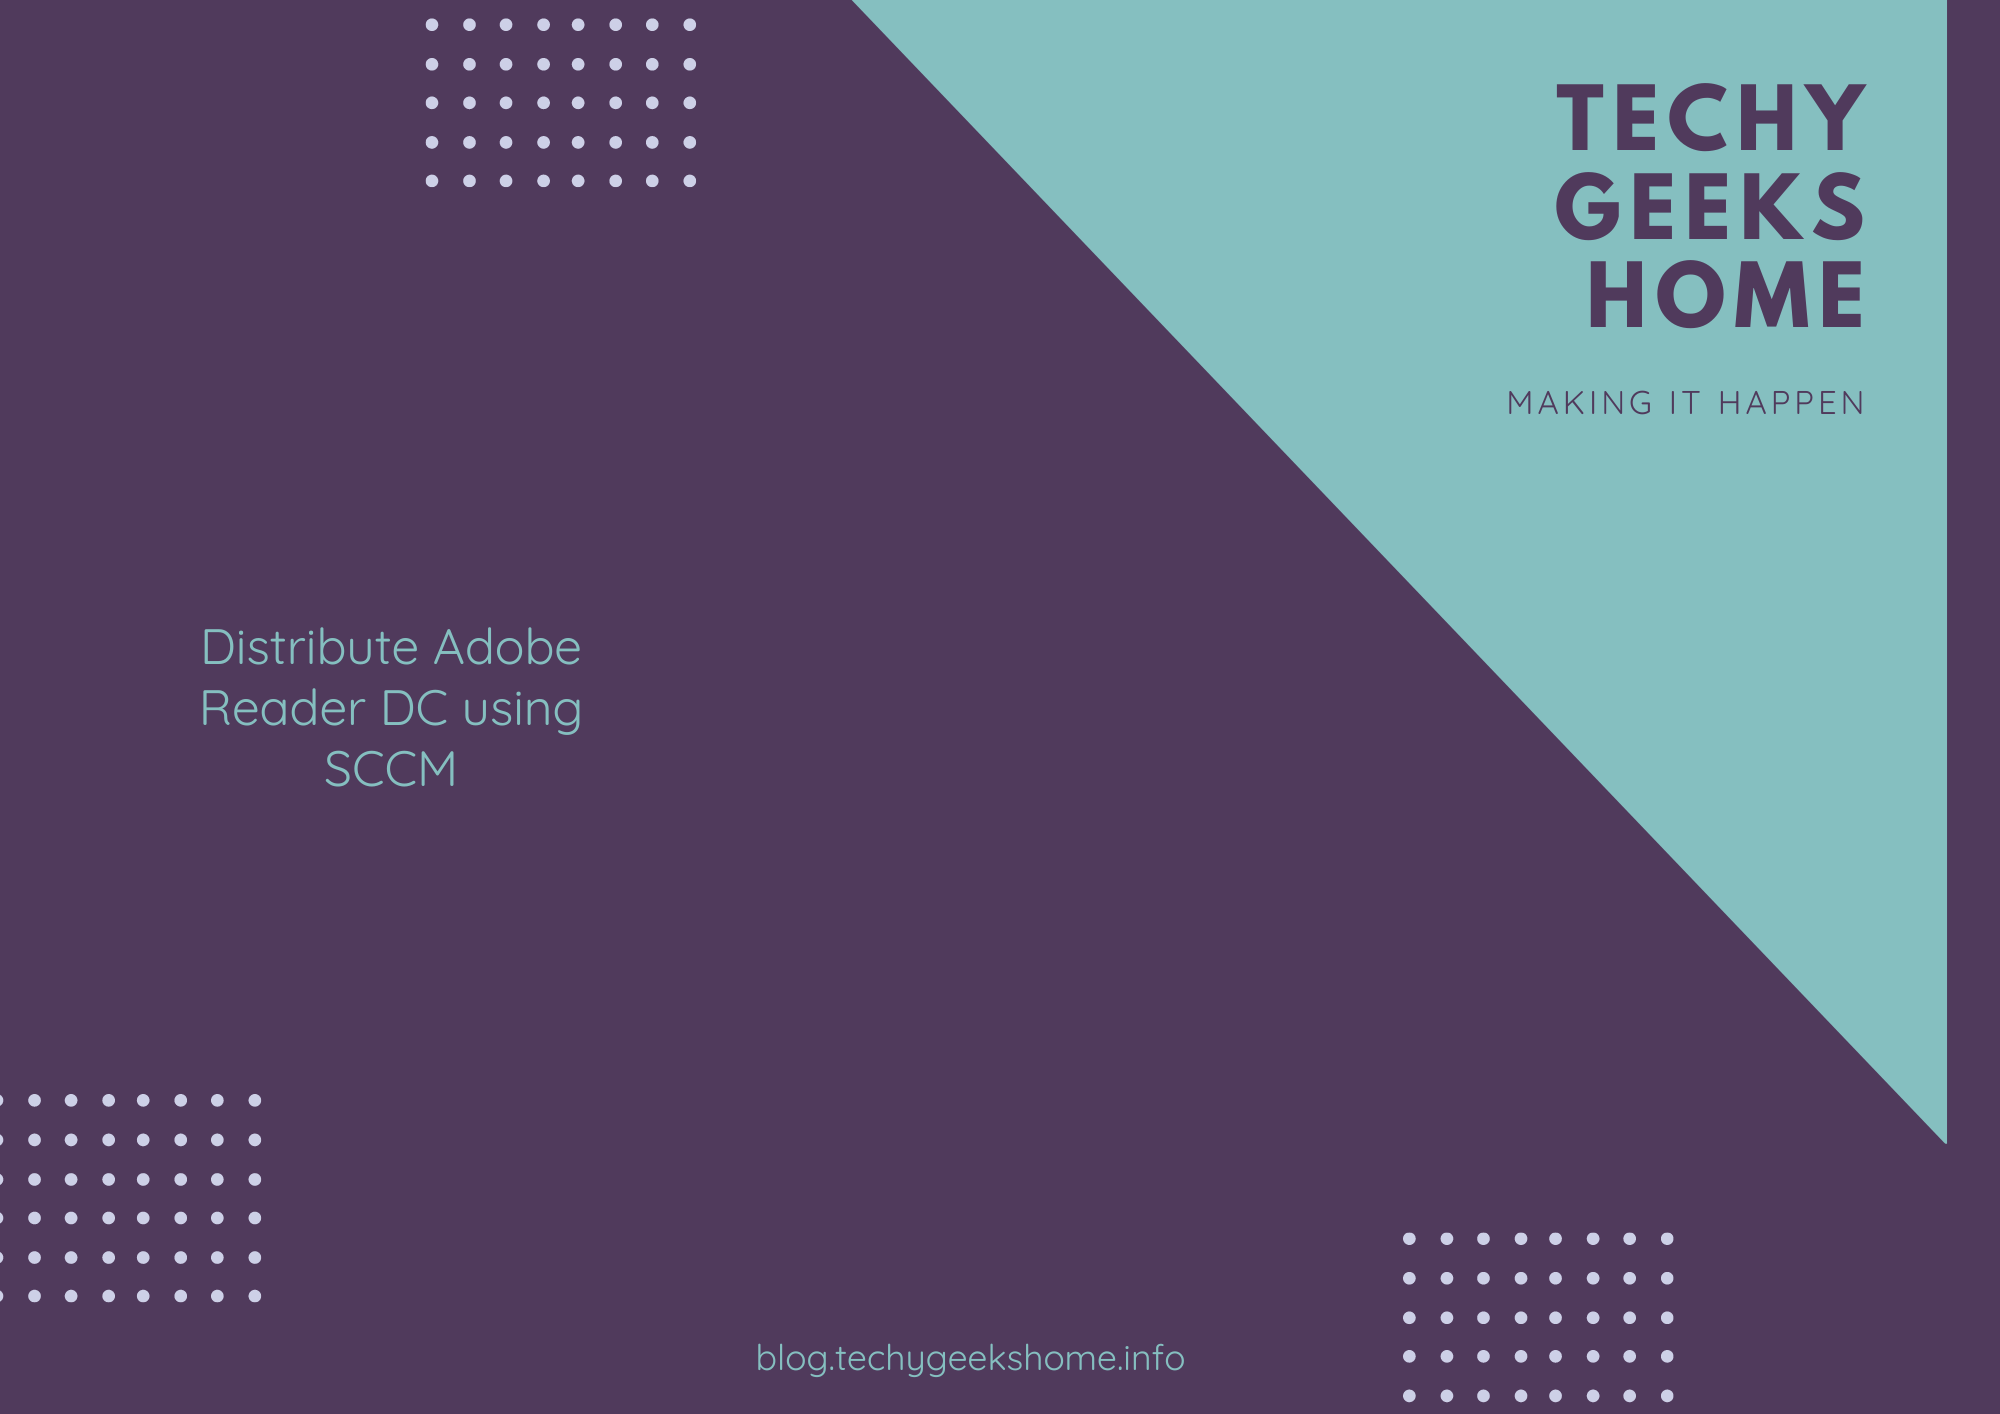 This image features a graphic design with a deep purple background diagonally split by a navy blue section. It includes the text "Techy Geeks Home - Making It Happen" and "Distribute